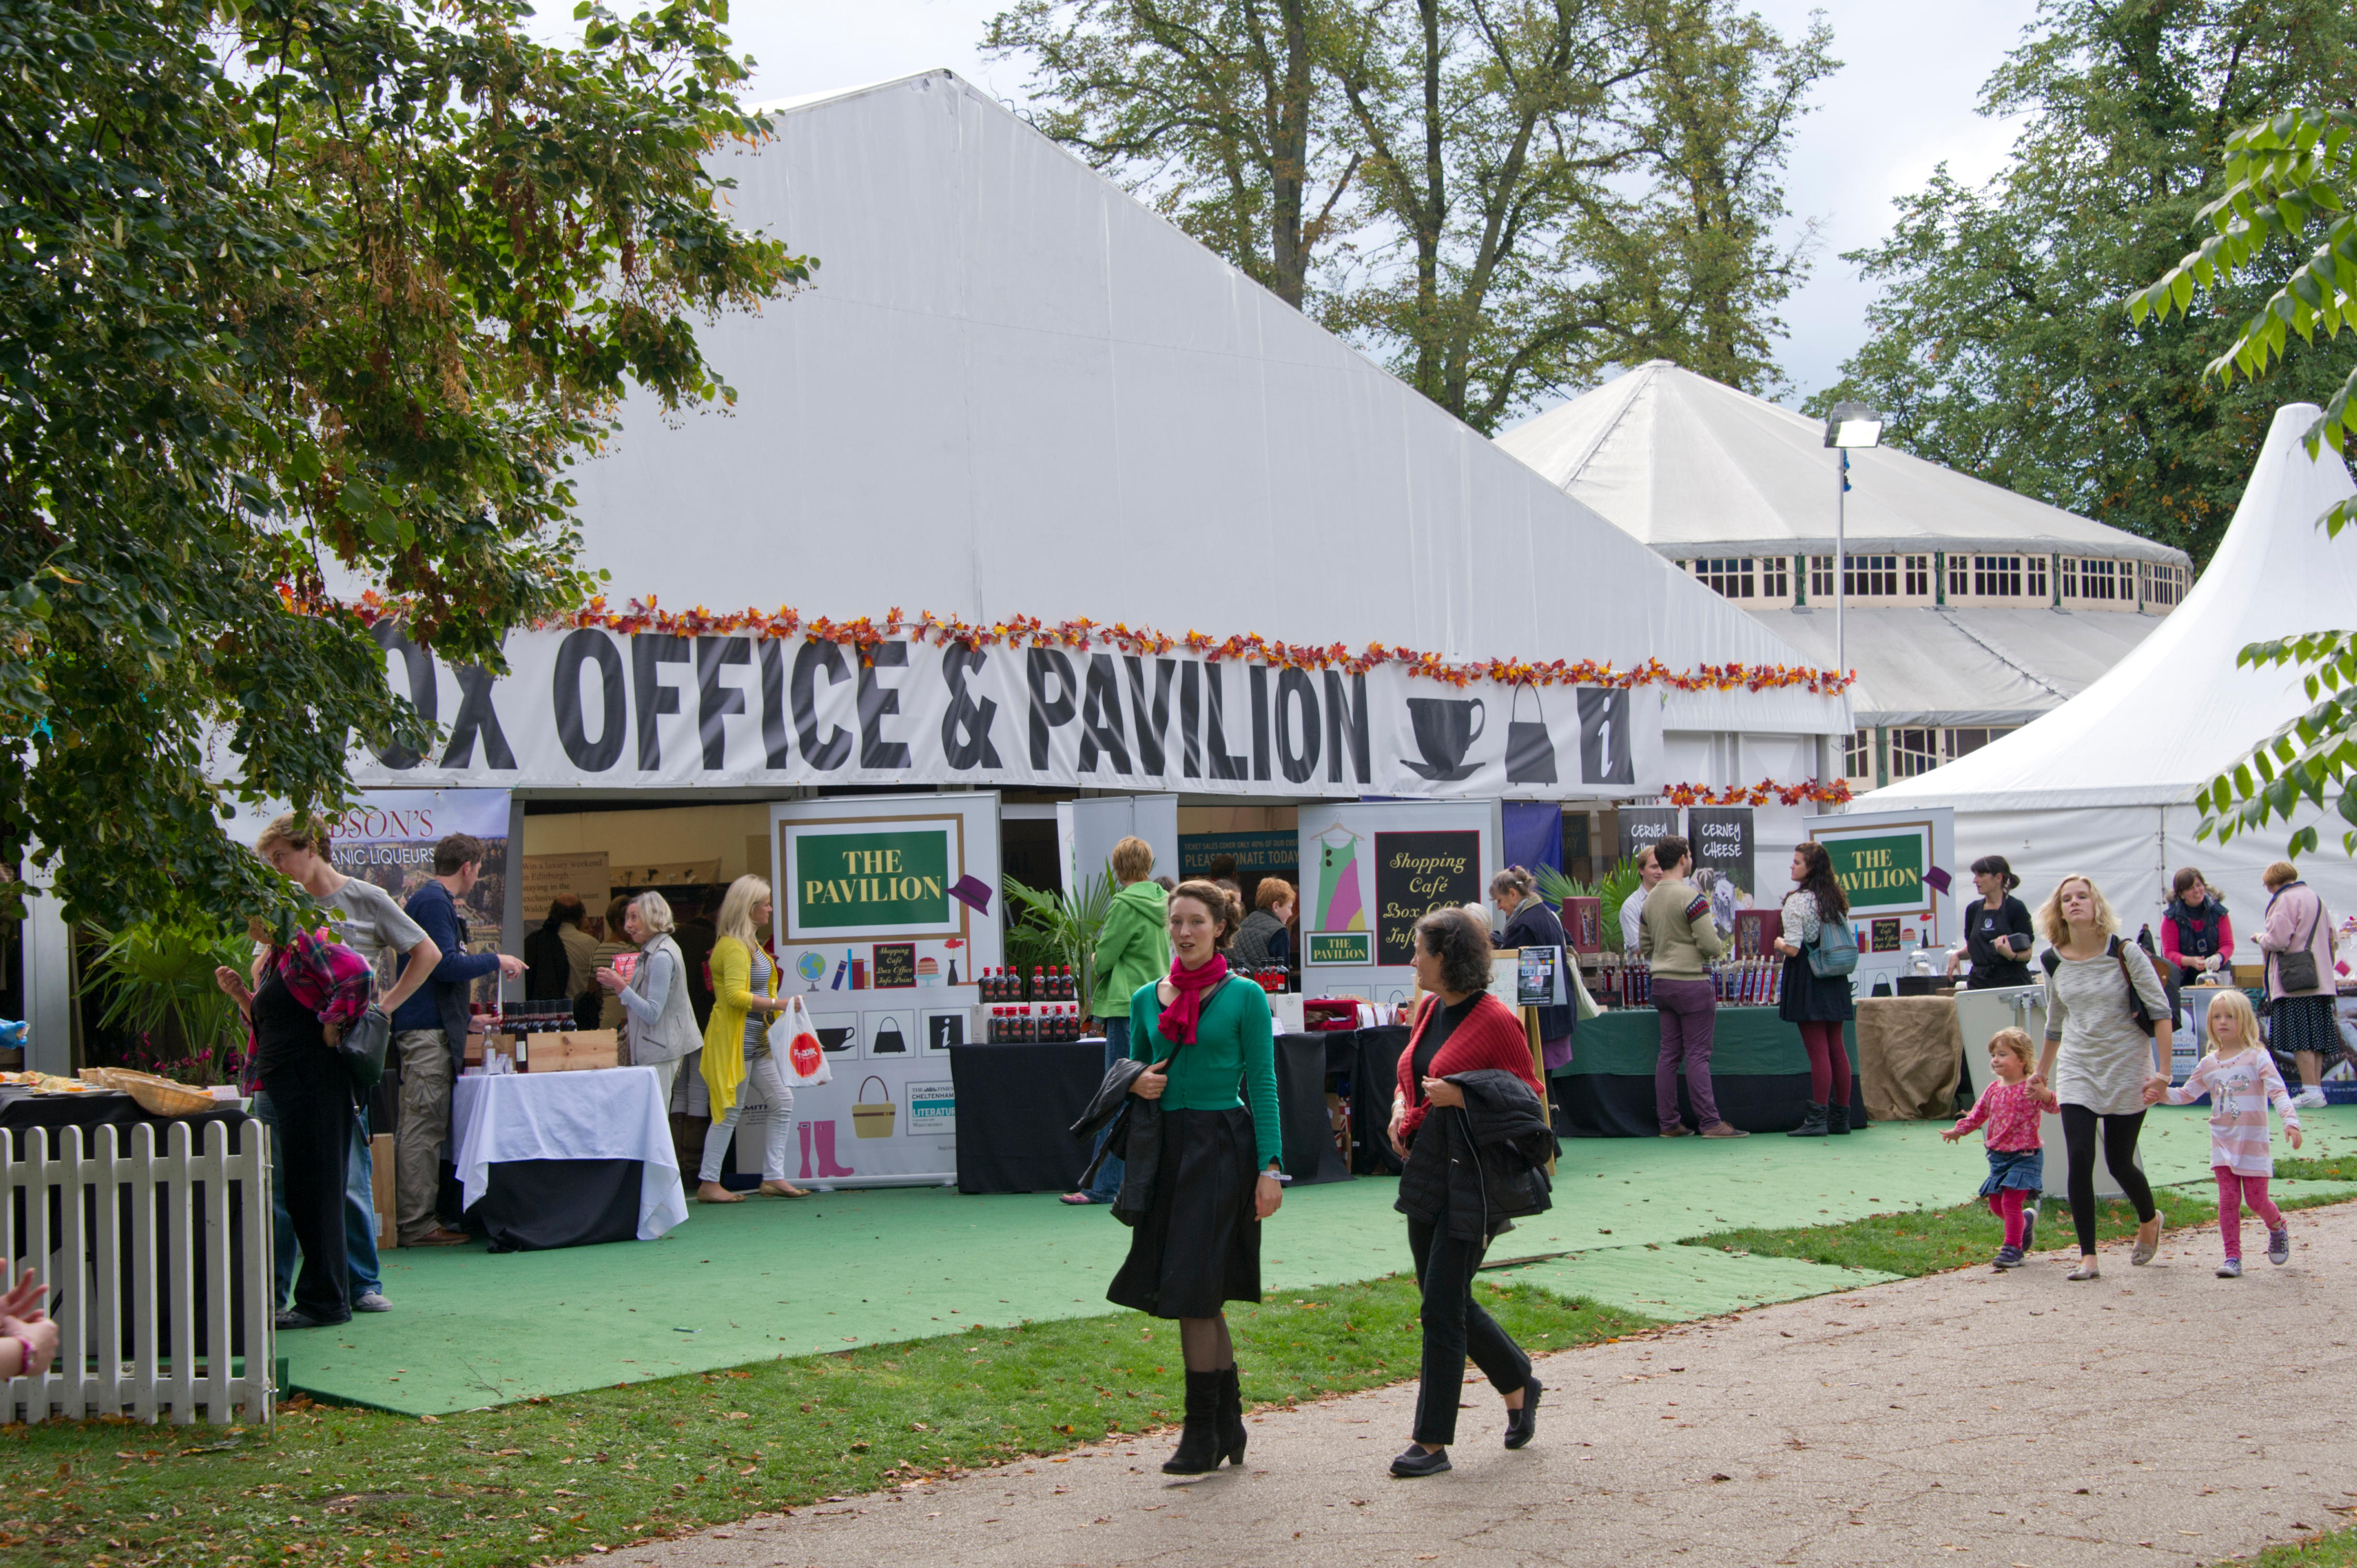 Cheltenham Literature Festival set to welcome more than 1,000 authors